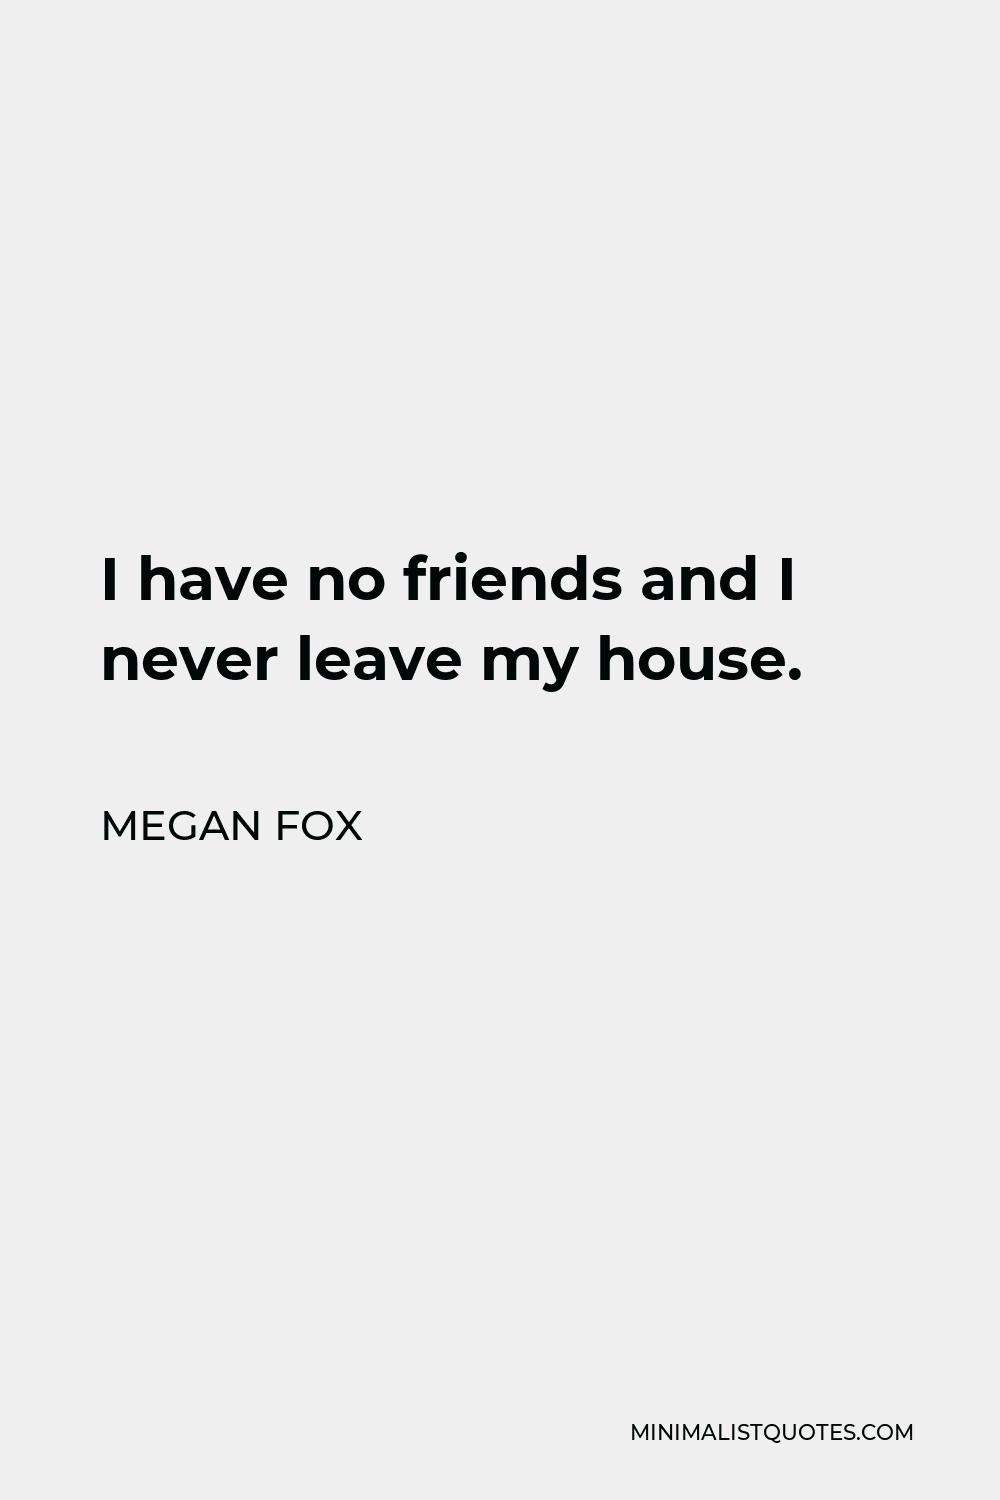 Megan Fox Quote - I have no friends and I never leave my house.